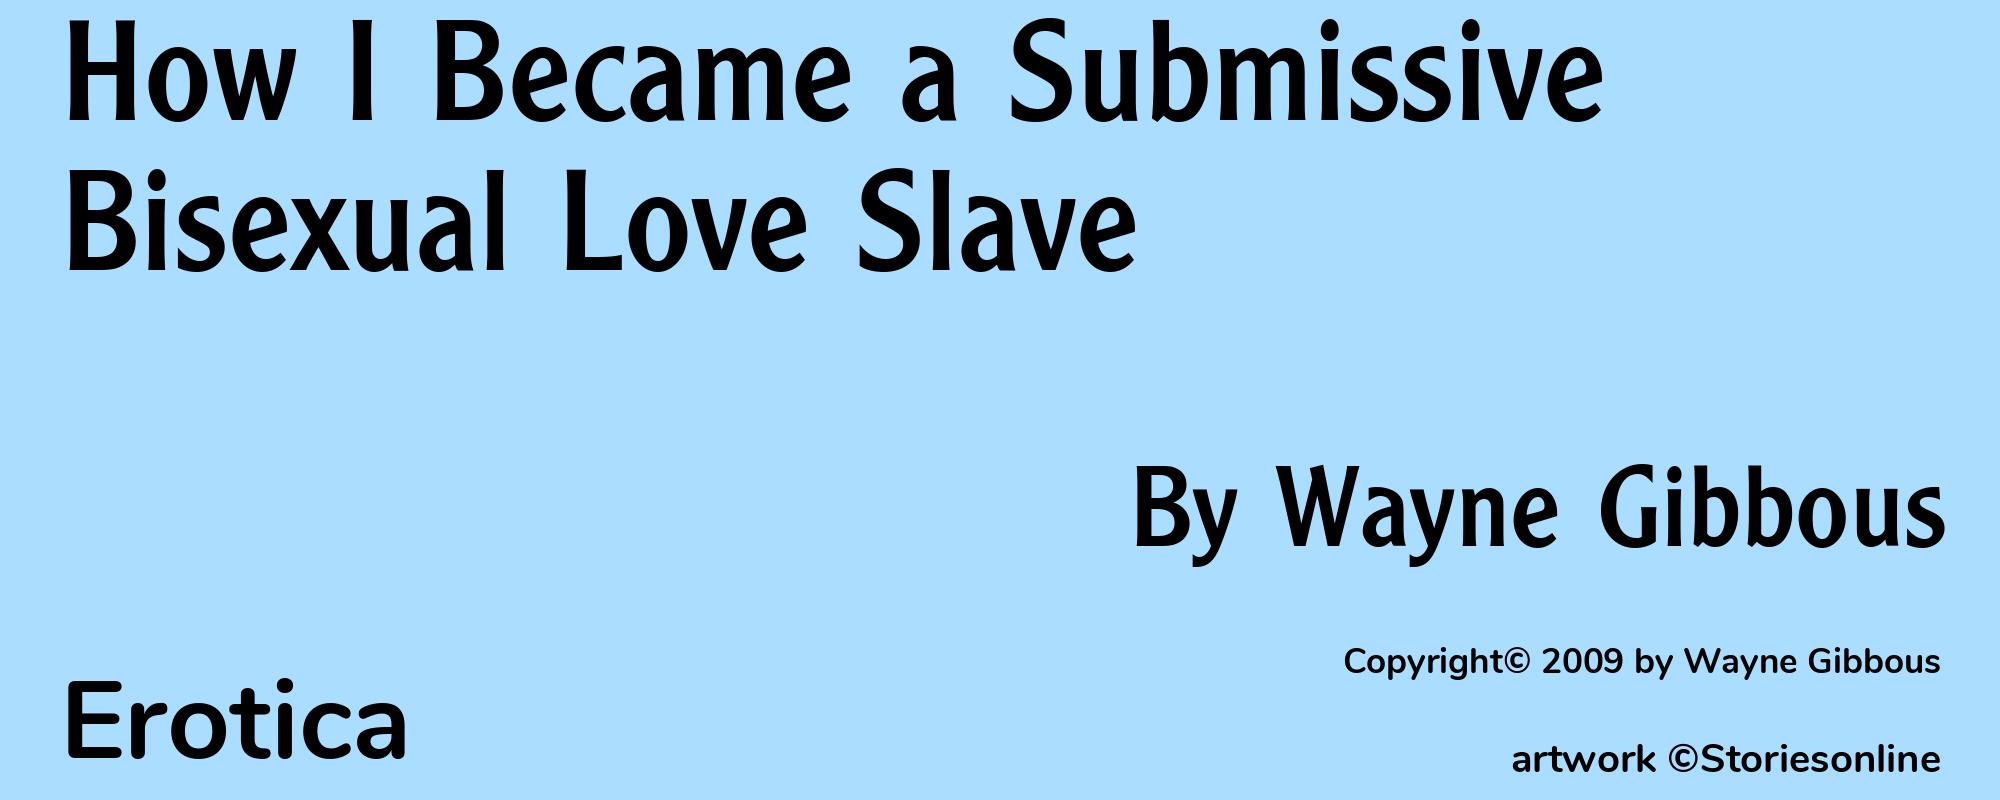 How I Became a Submissive Bisexual Love Slave - Cover